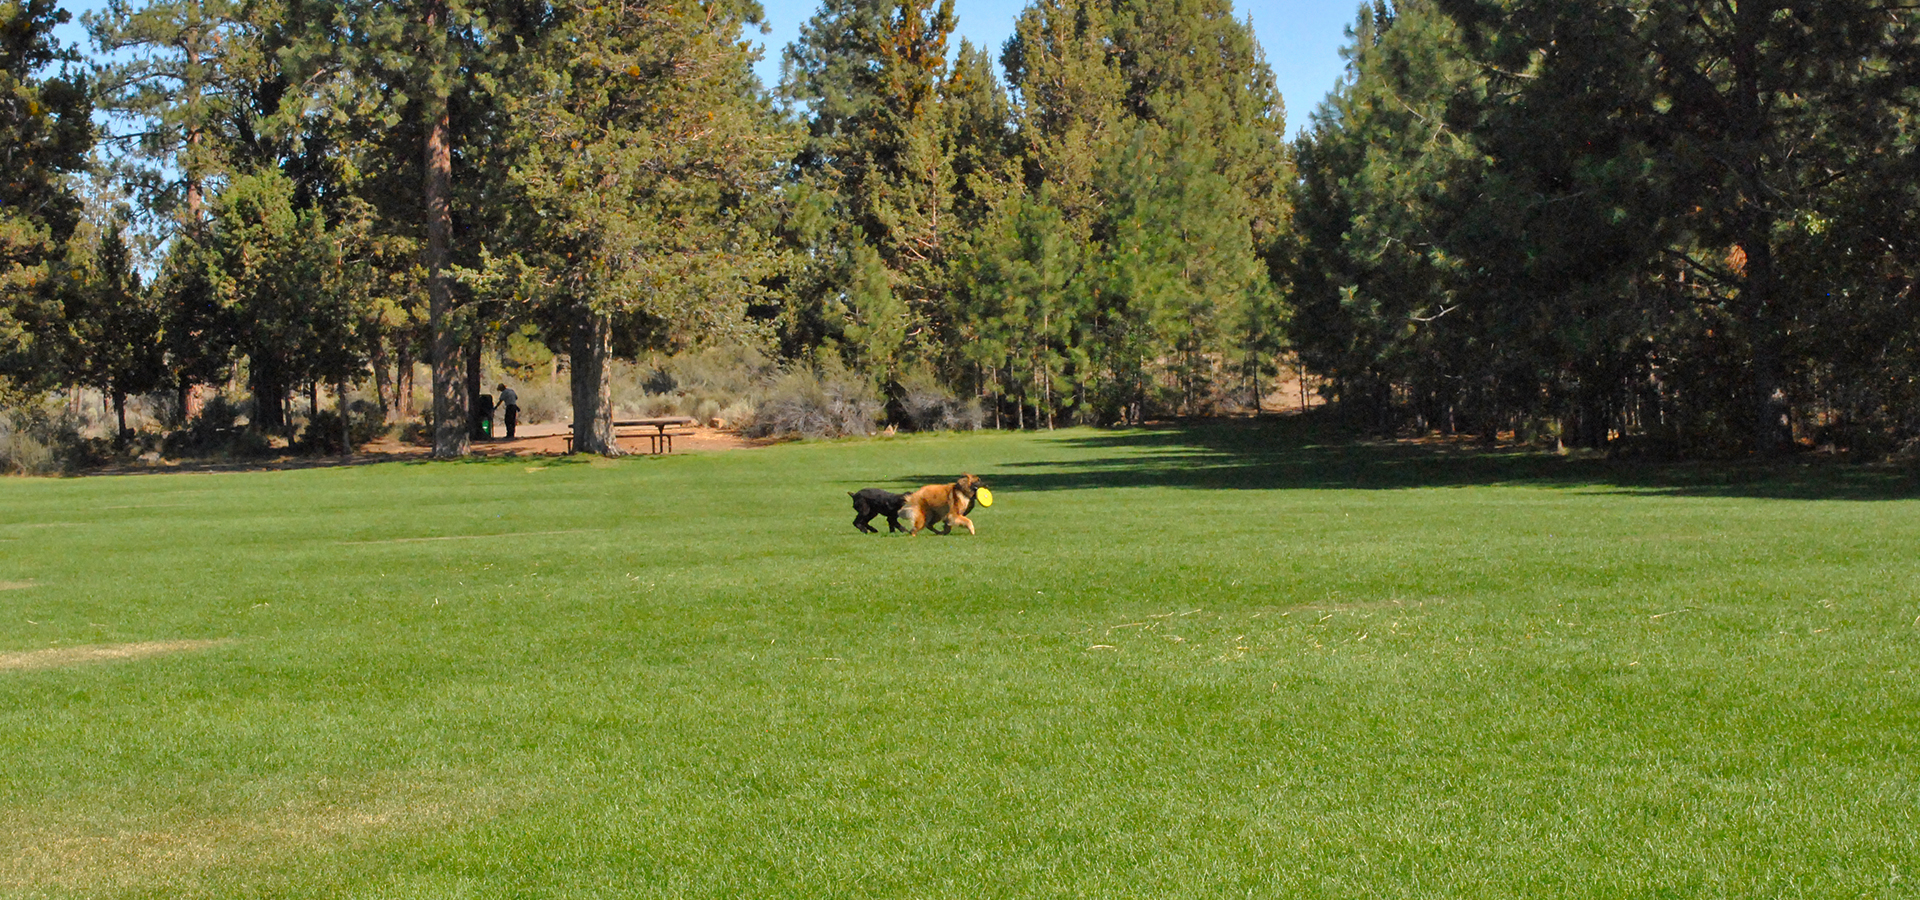 Two dogs playing in the open space at Sawyer Park.